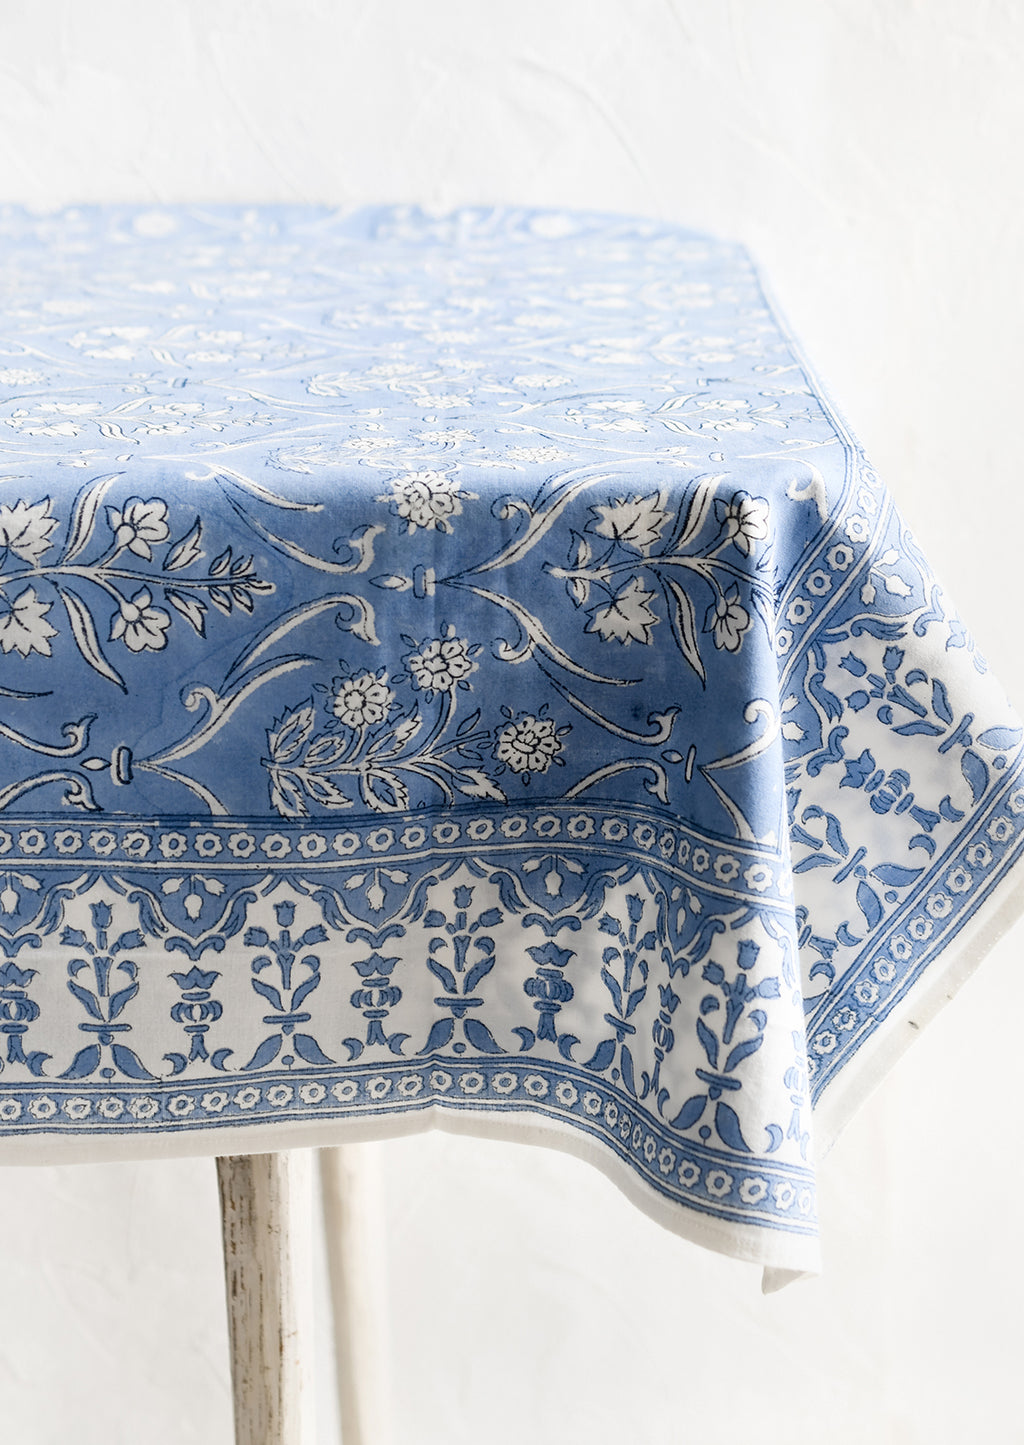 2: A floral print tablecloth in blue and white.